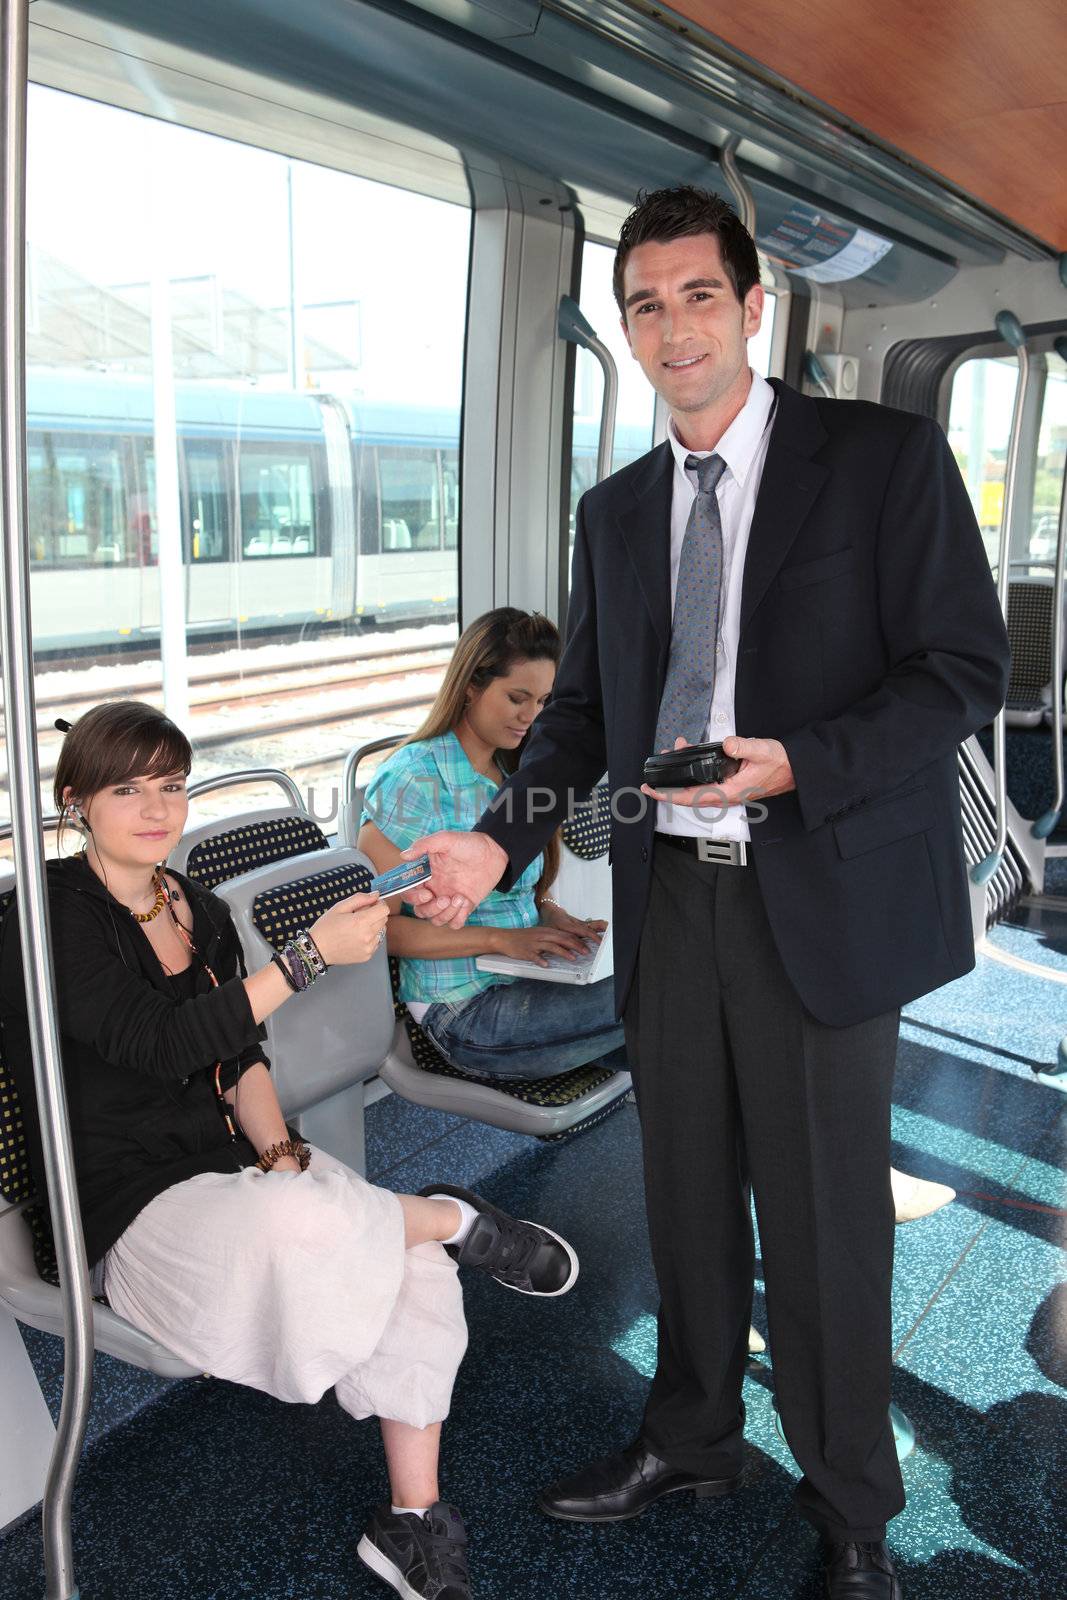 Man checking tram tickets by phovoir